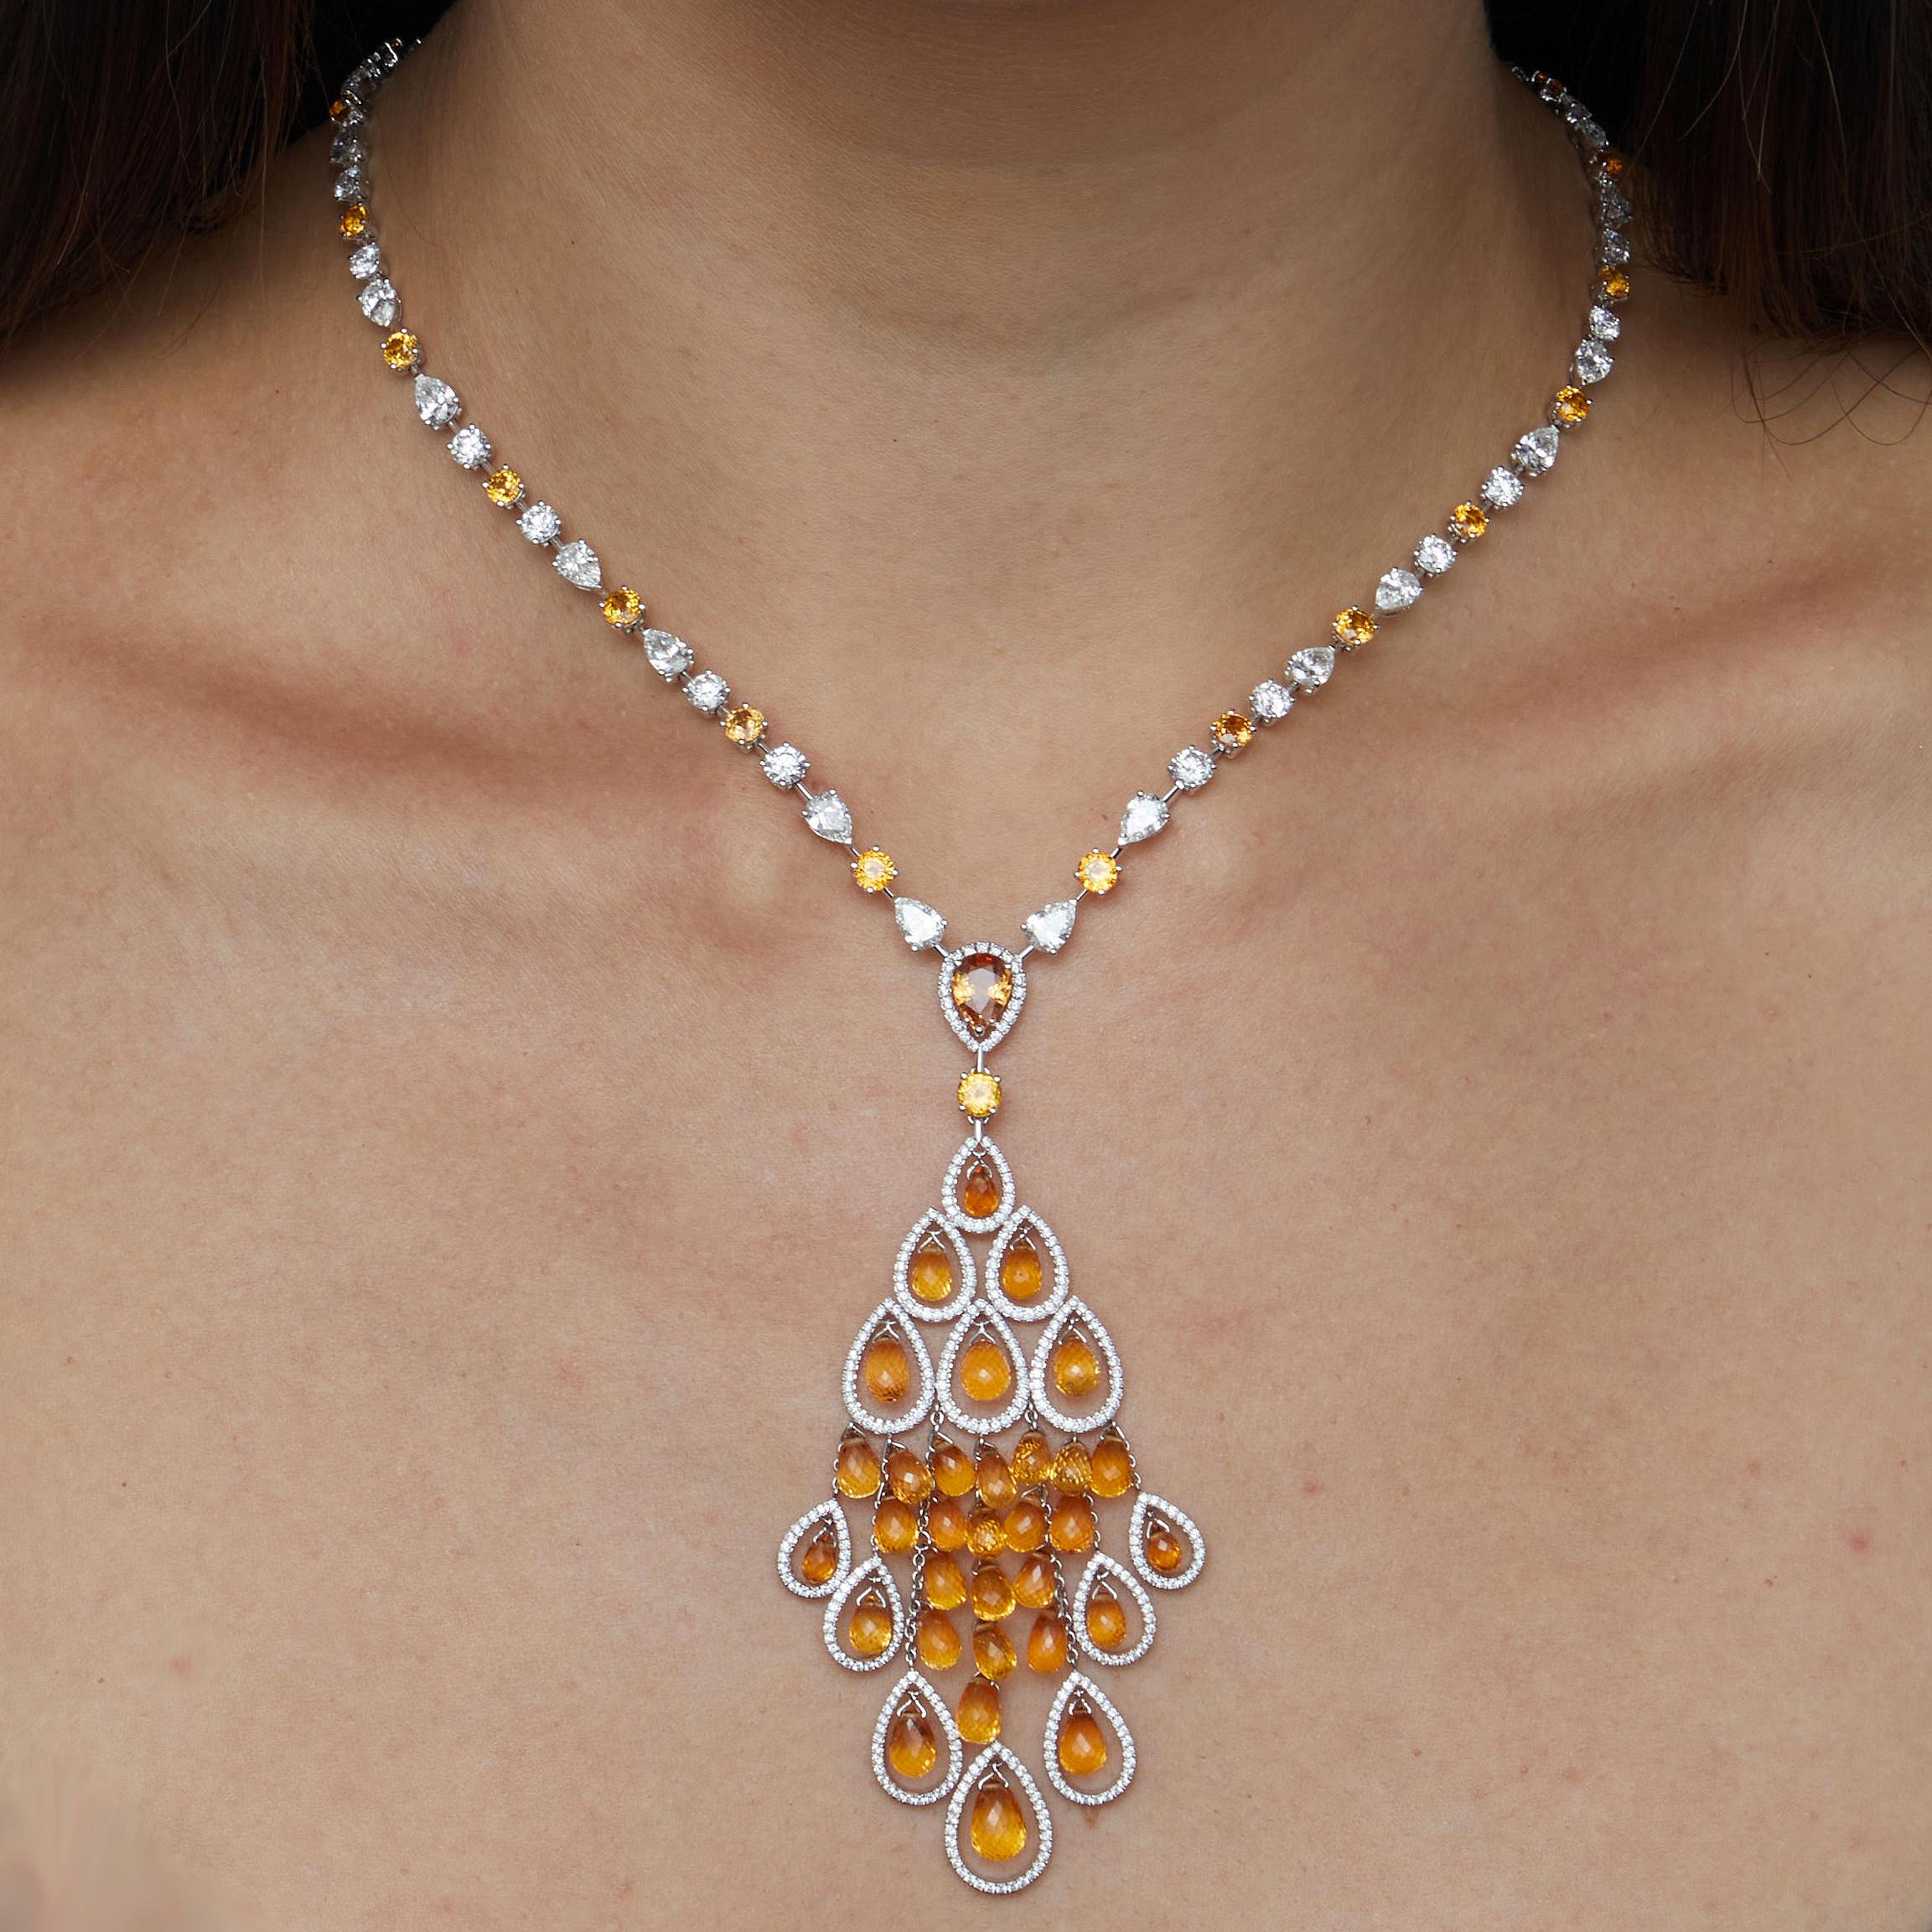 An incredible Graff necklace showcasing 57 orange sapphires totalling 43.15ct and diamonds appx measuring 11.95cts in shimmering 18k white gold. This collection has been worn by royalty  specifically Princess Charlene in 2016 to a cocktail